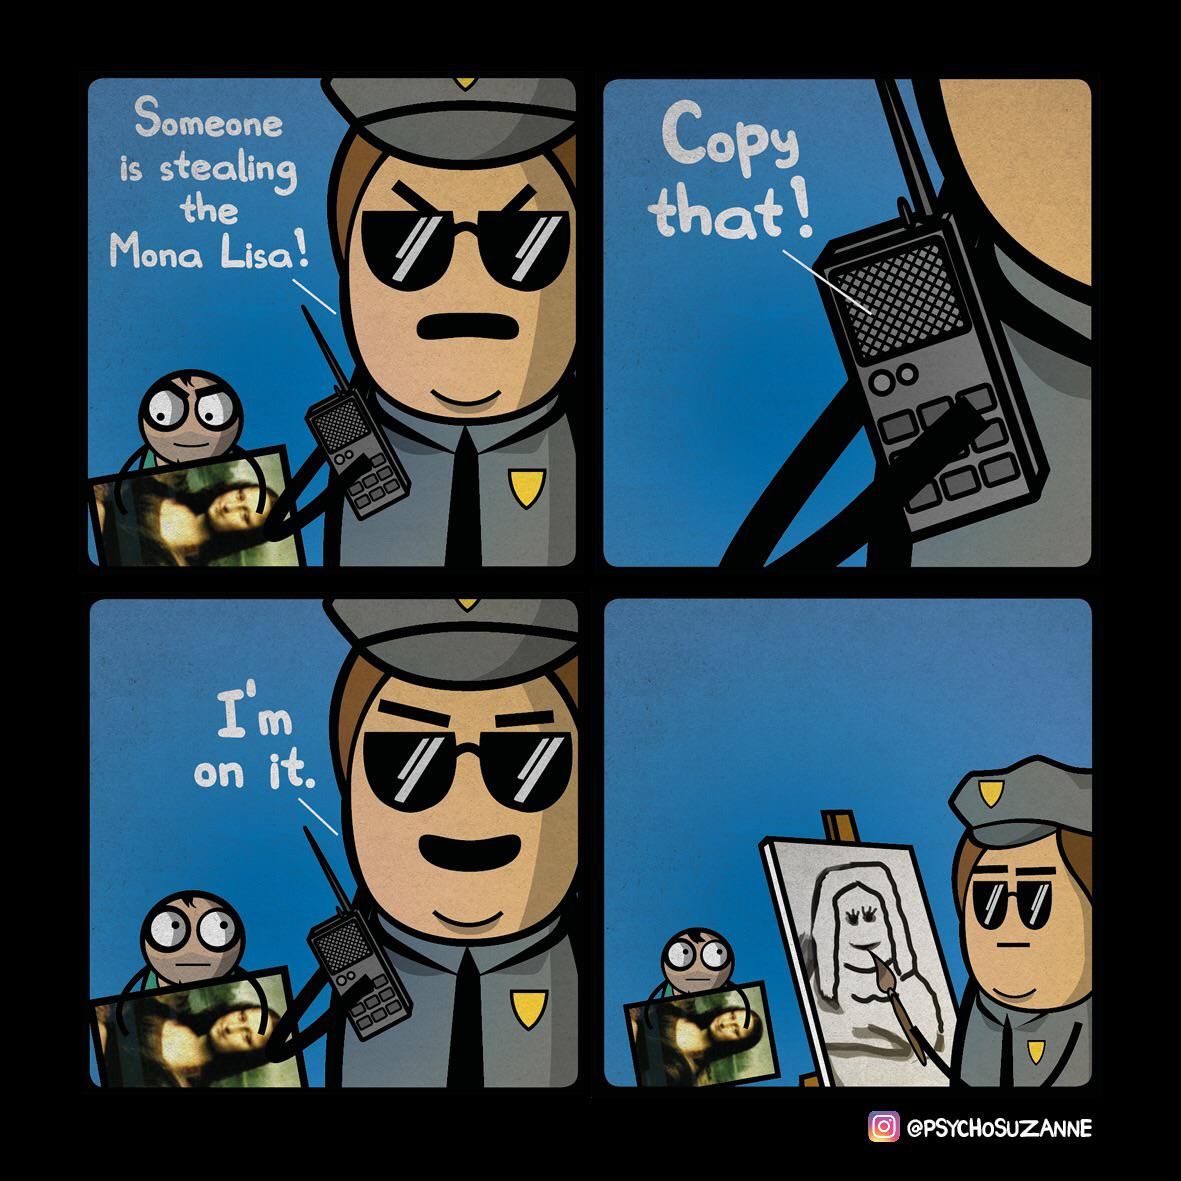 Well done, Officer